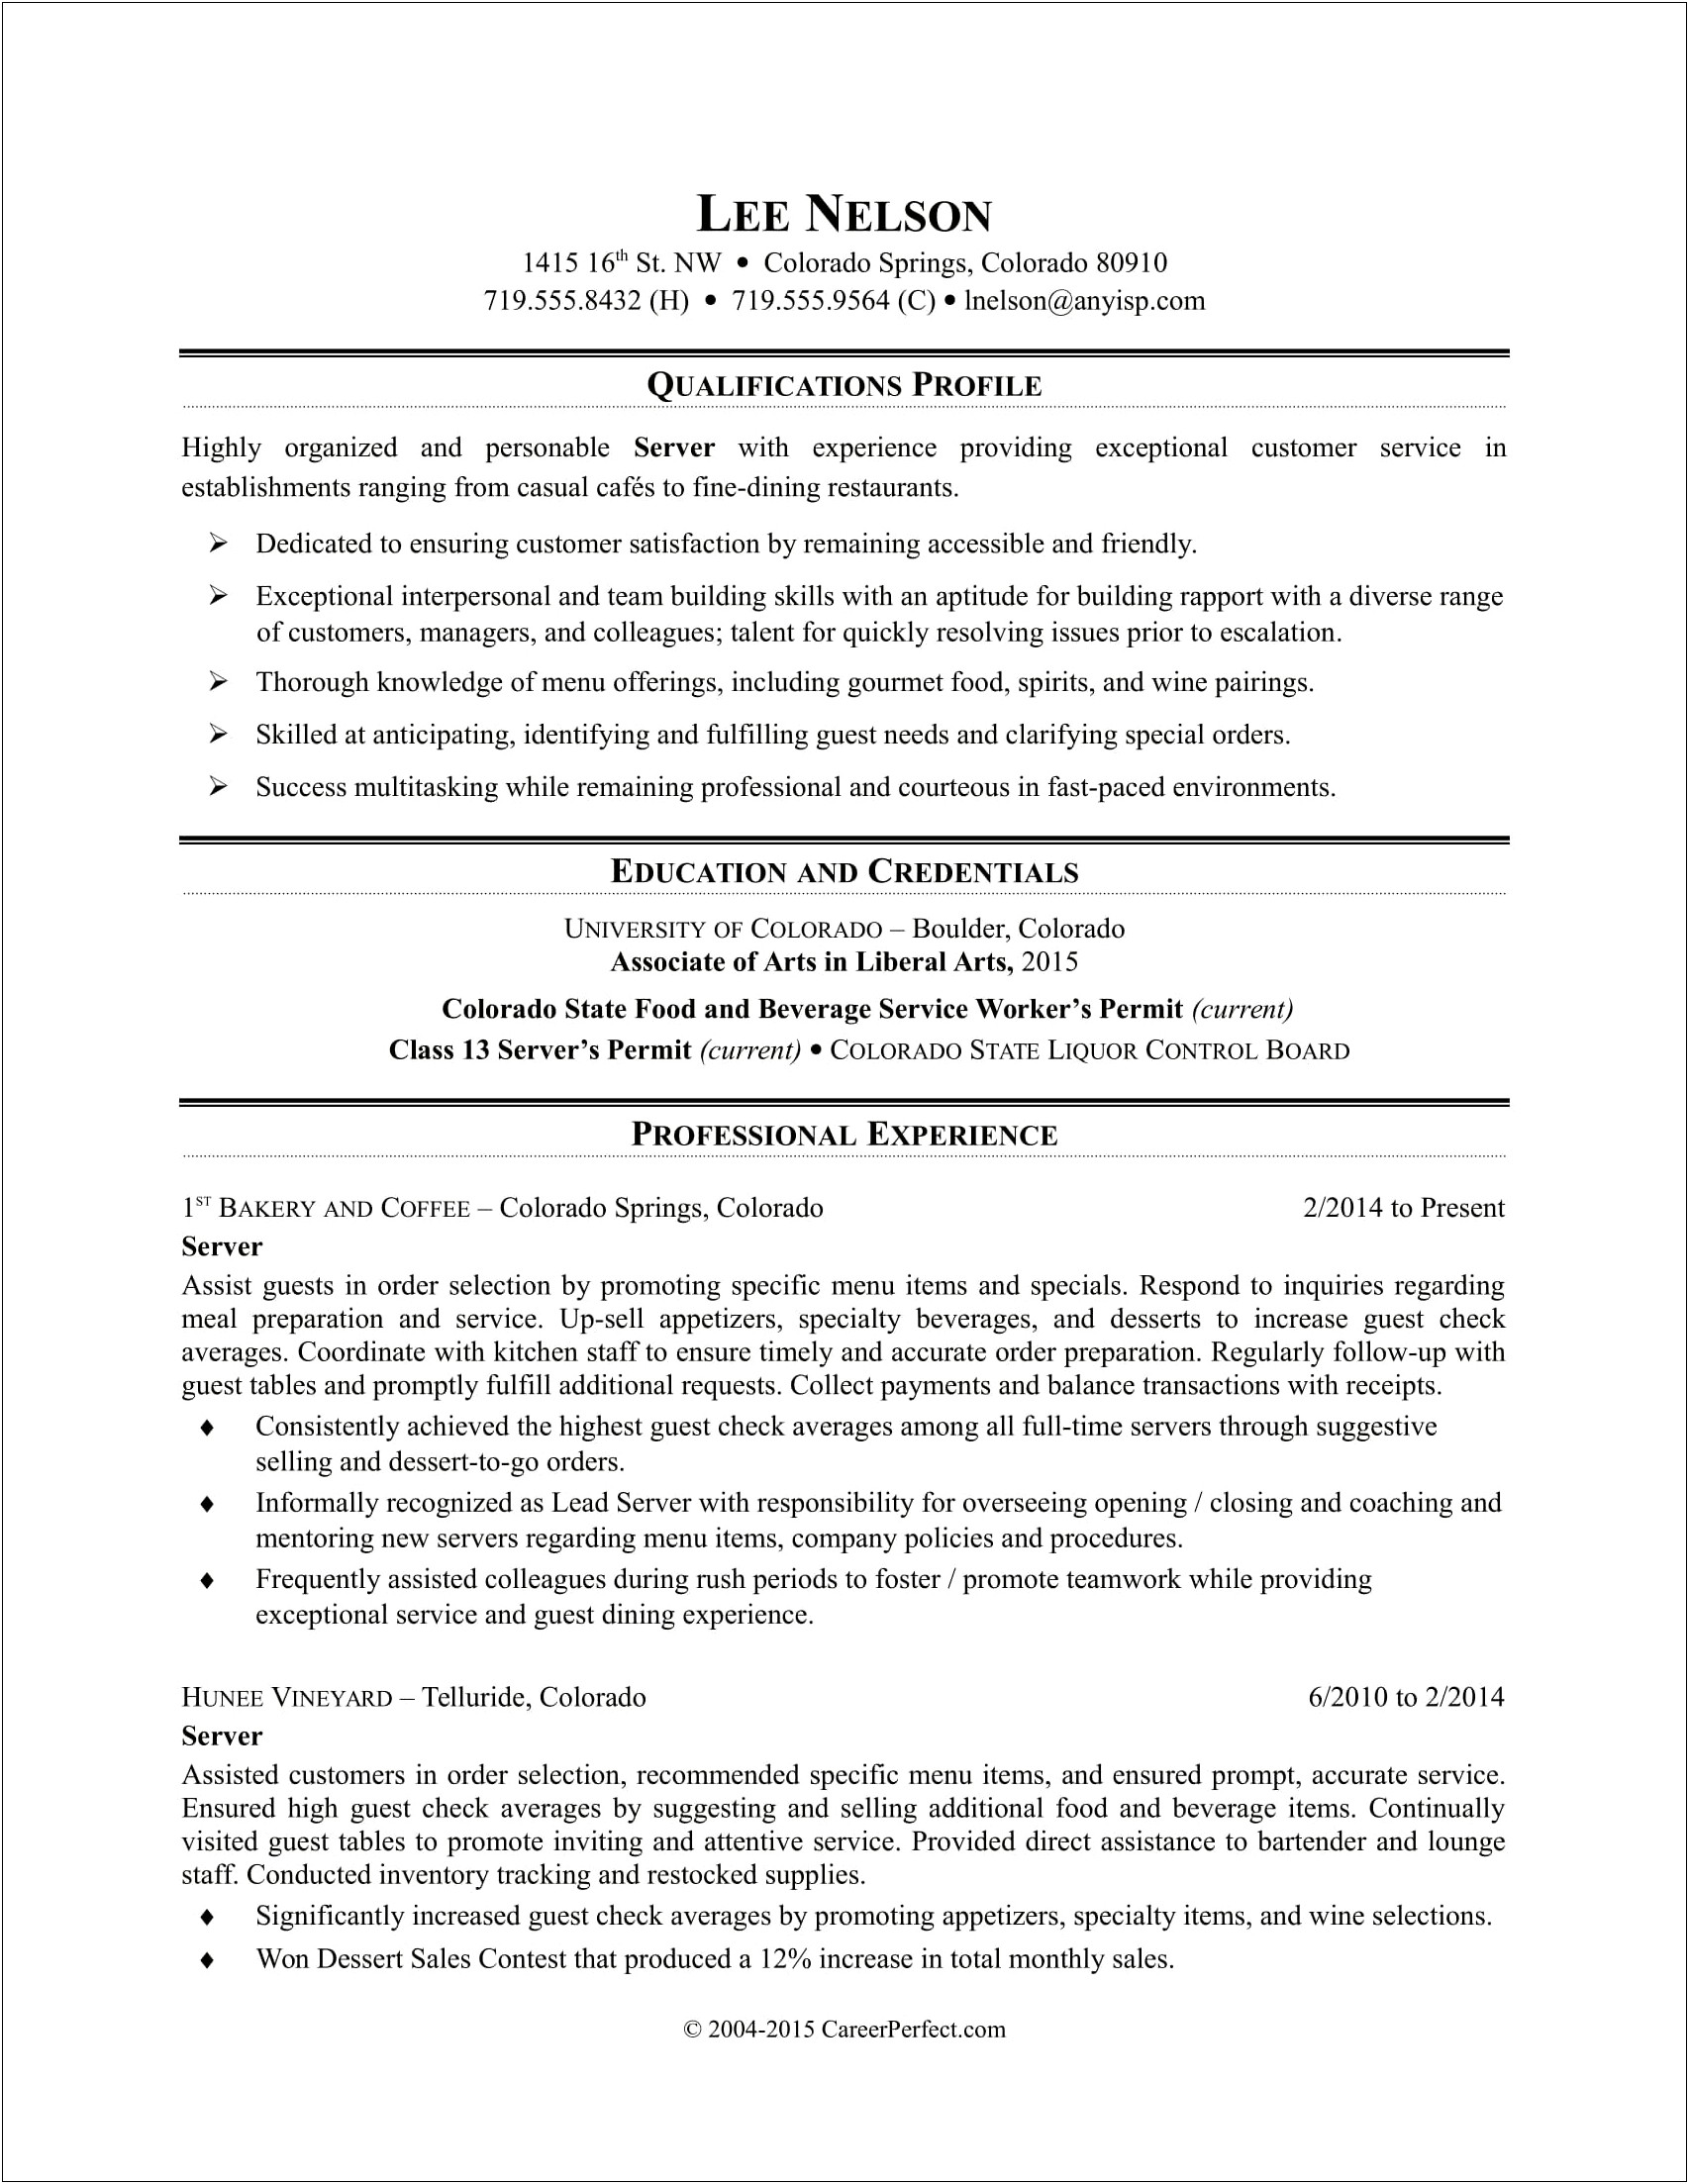 Resume Restaurant Work Experience Examples To Career